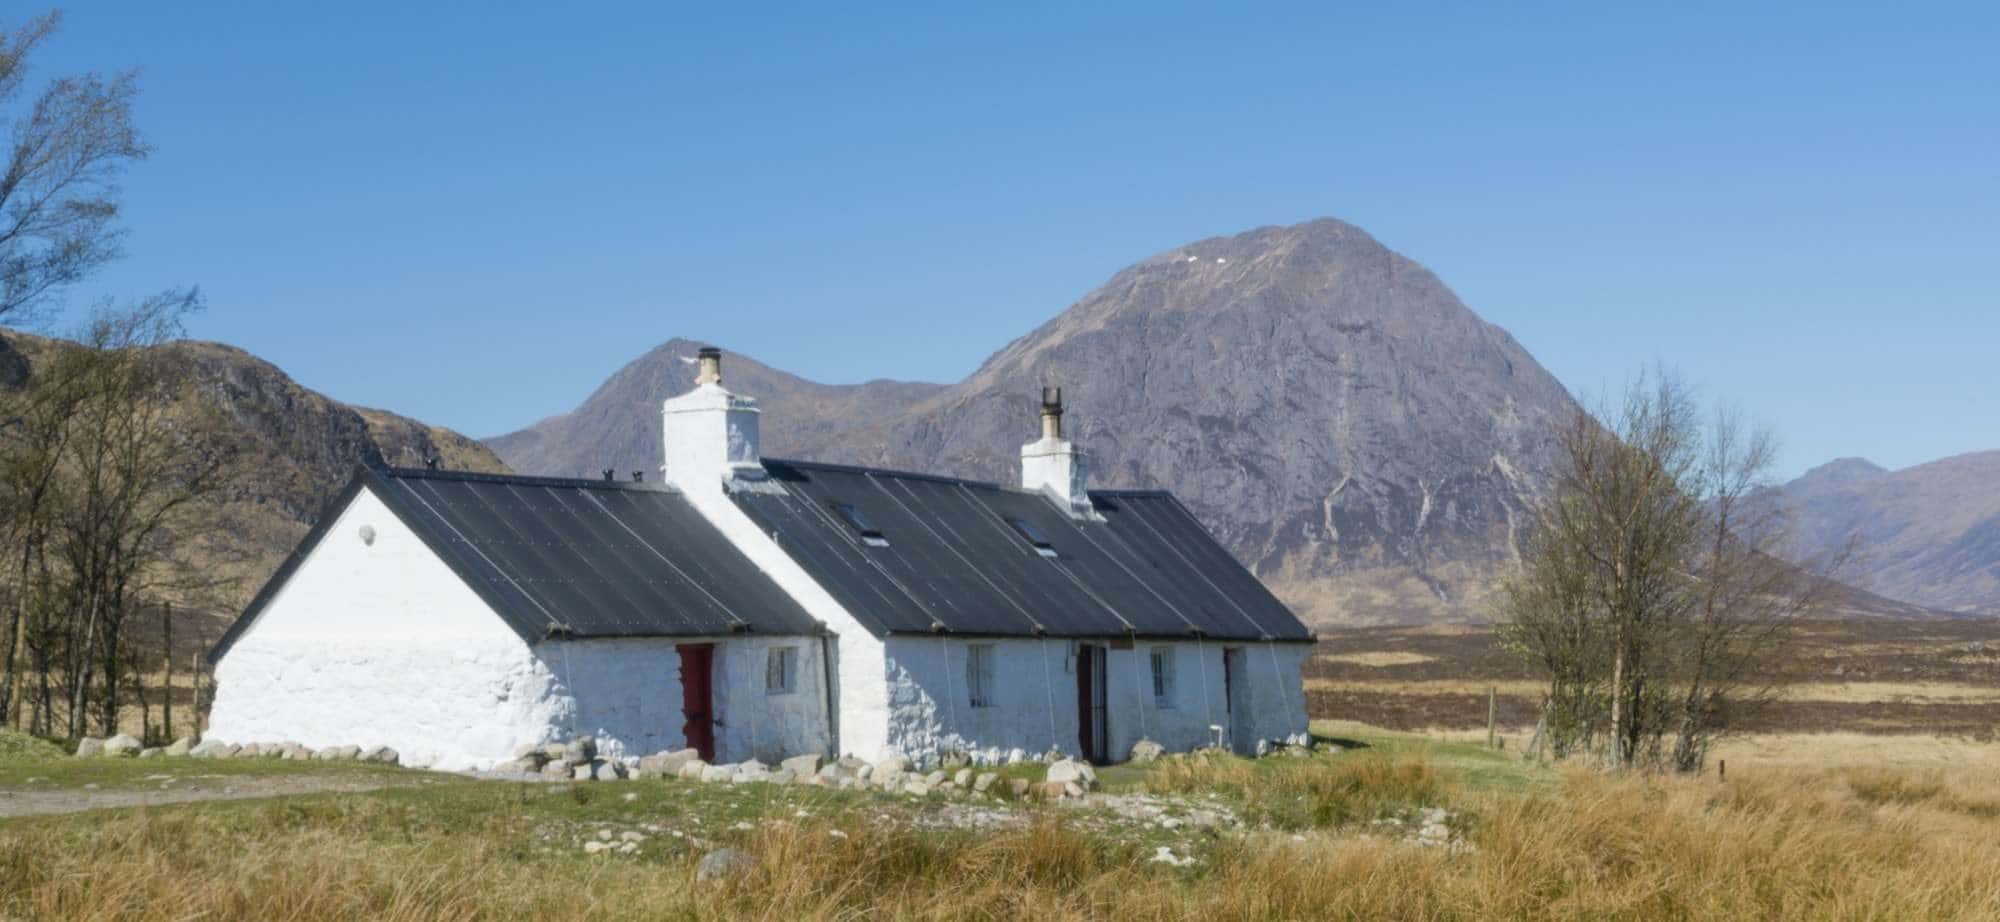 Blackrock Cottage, situated on the access road to the Glencoe mountain ski area with Buachaille Etive Mor seen beyond